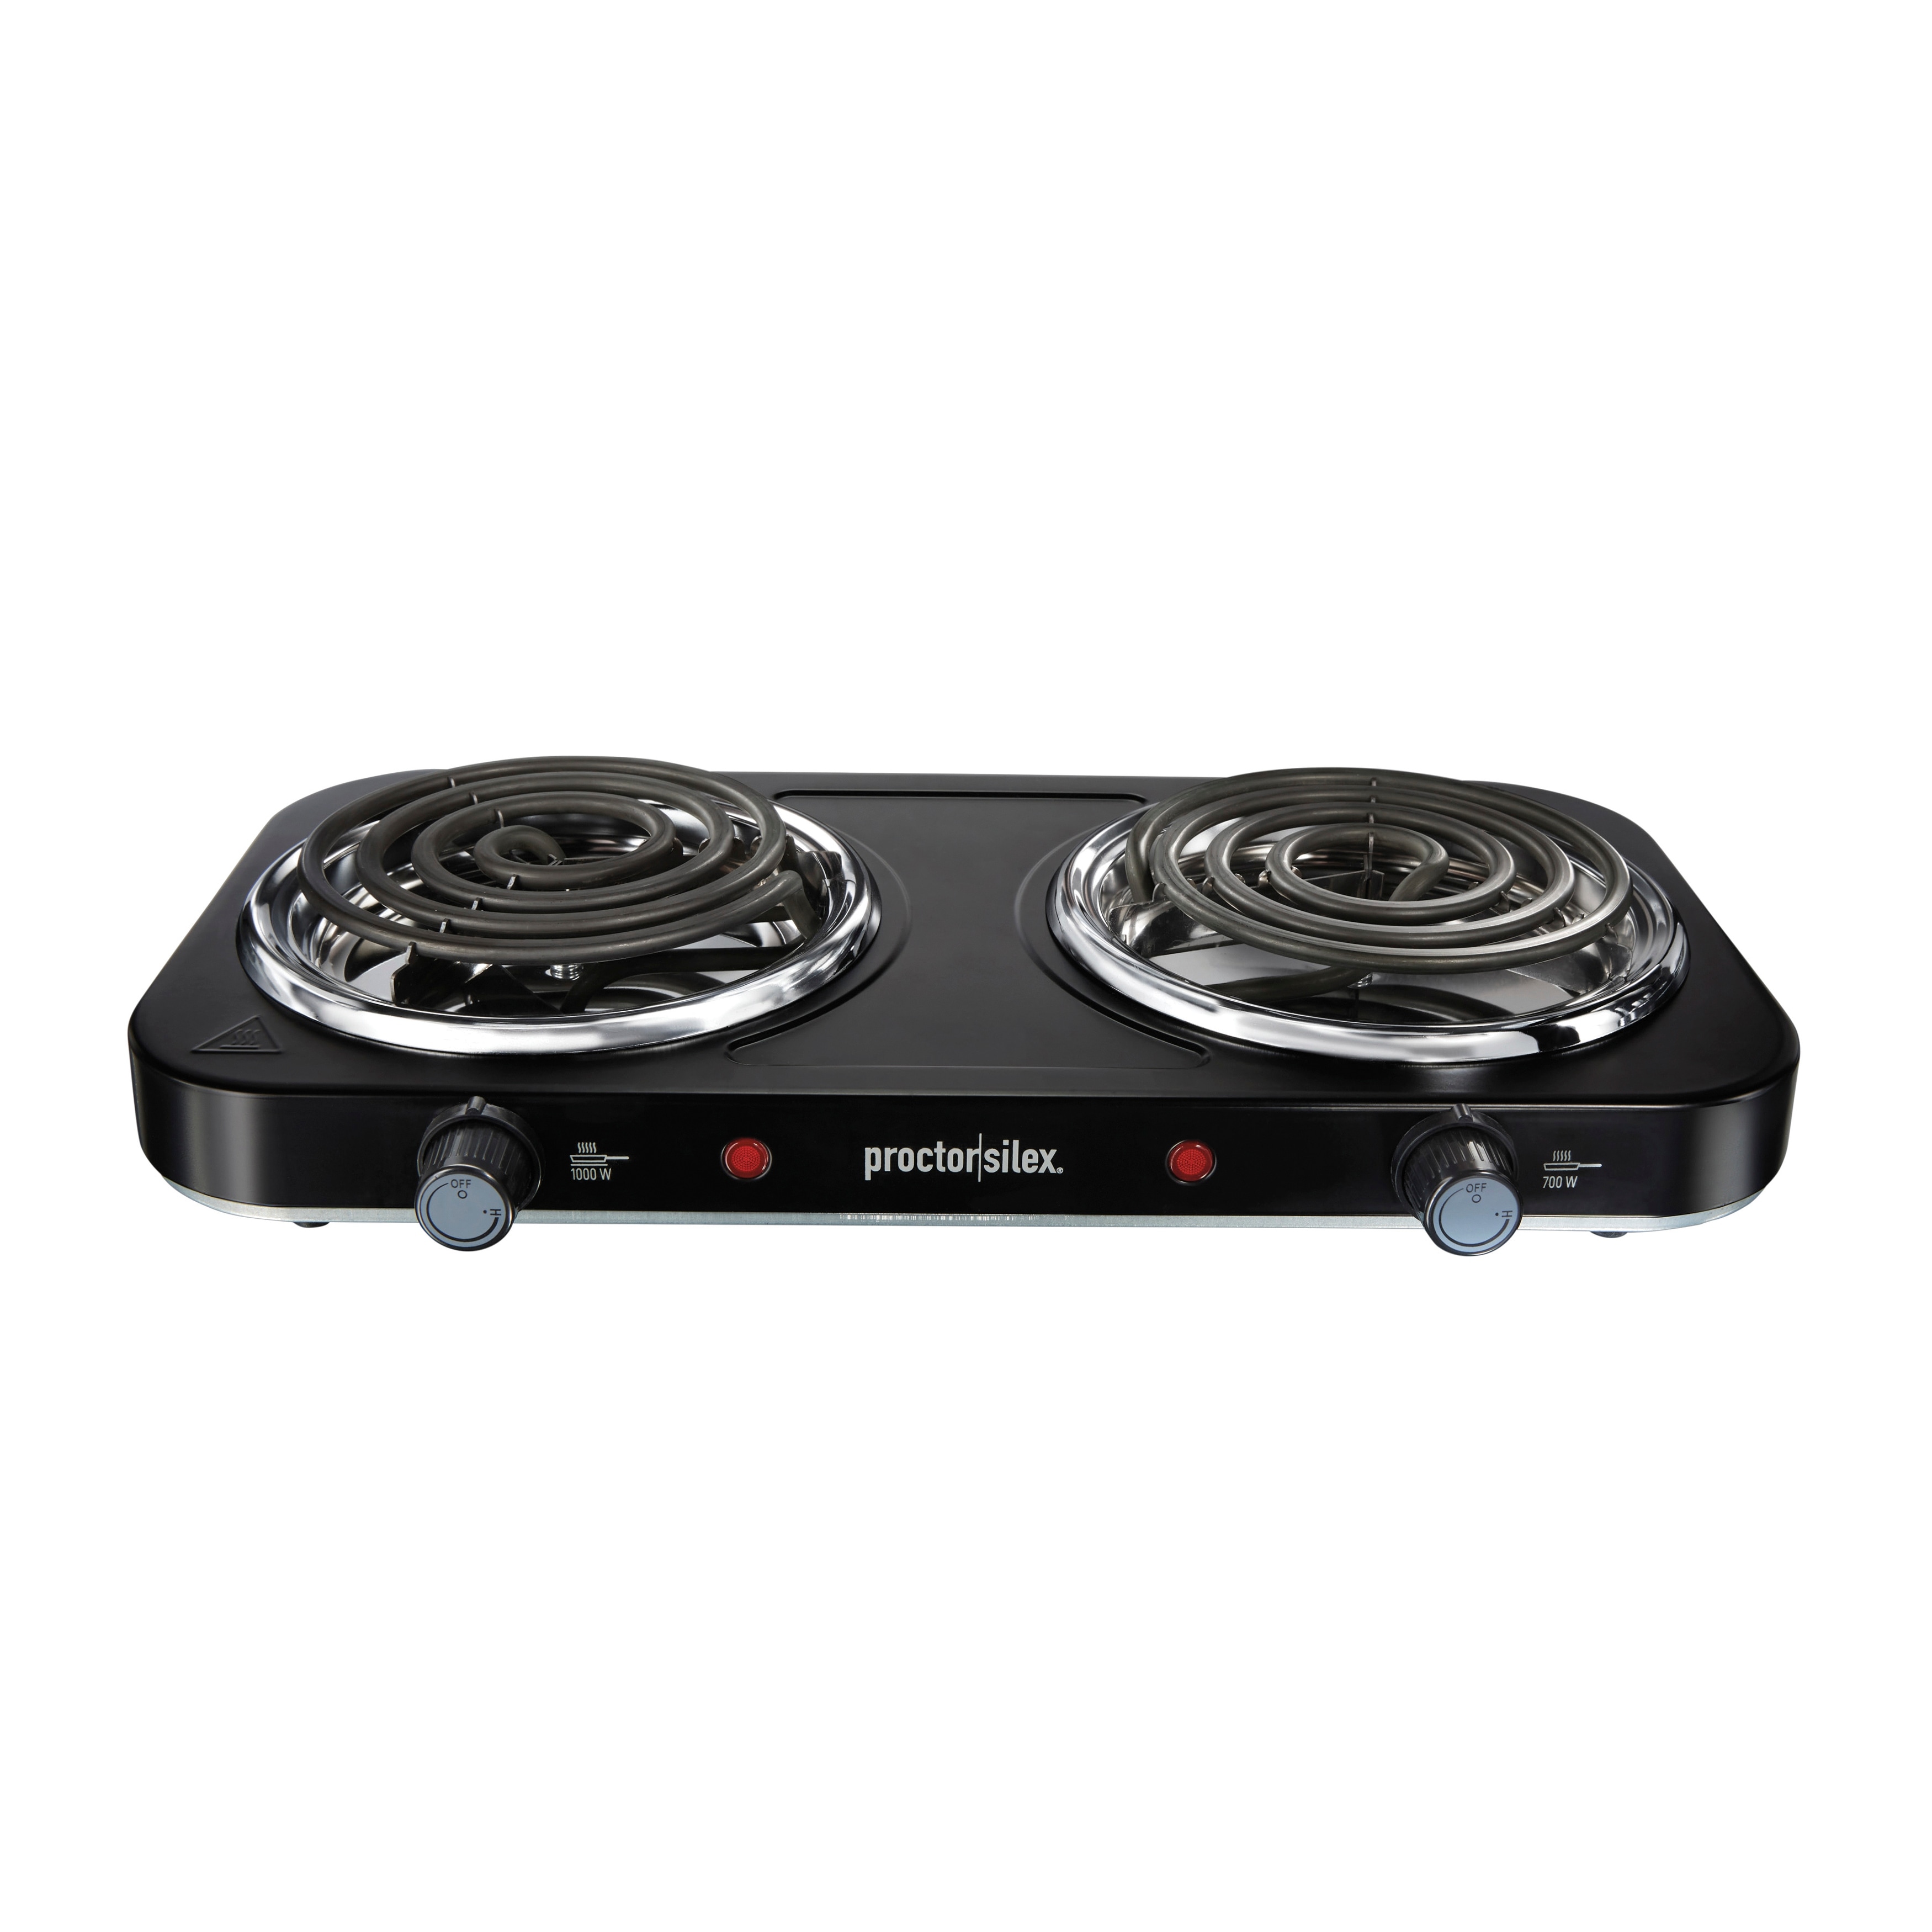 https://ak1.ostkcdn.com/images/products/is/images/direct/604cca7b369310d7f3d8b228f3416d97ee11795f/Electric-Double-Burner-Cooktop.jpg